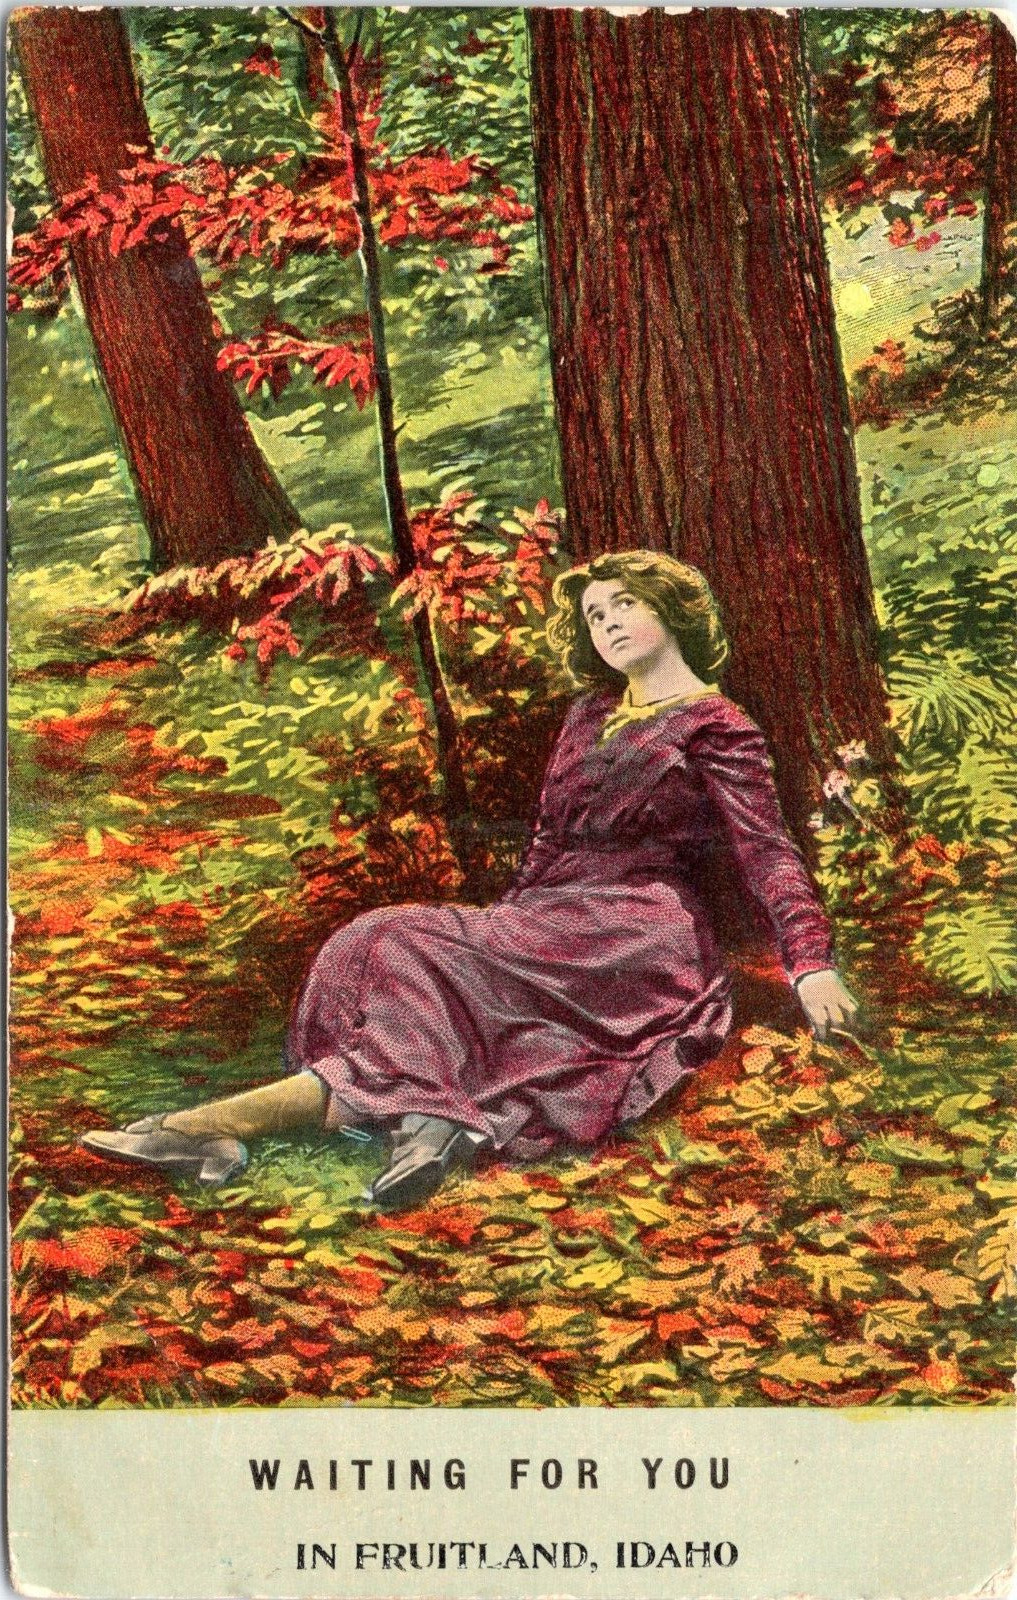 Waiting for You in Fruitland, Idaho - 1911 d/b Postcard - Woman Under Tree